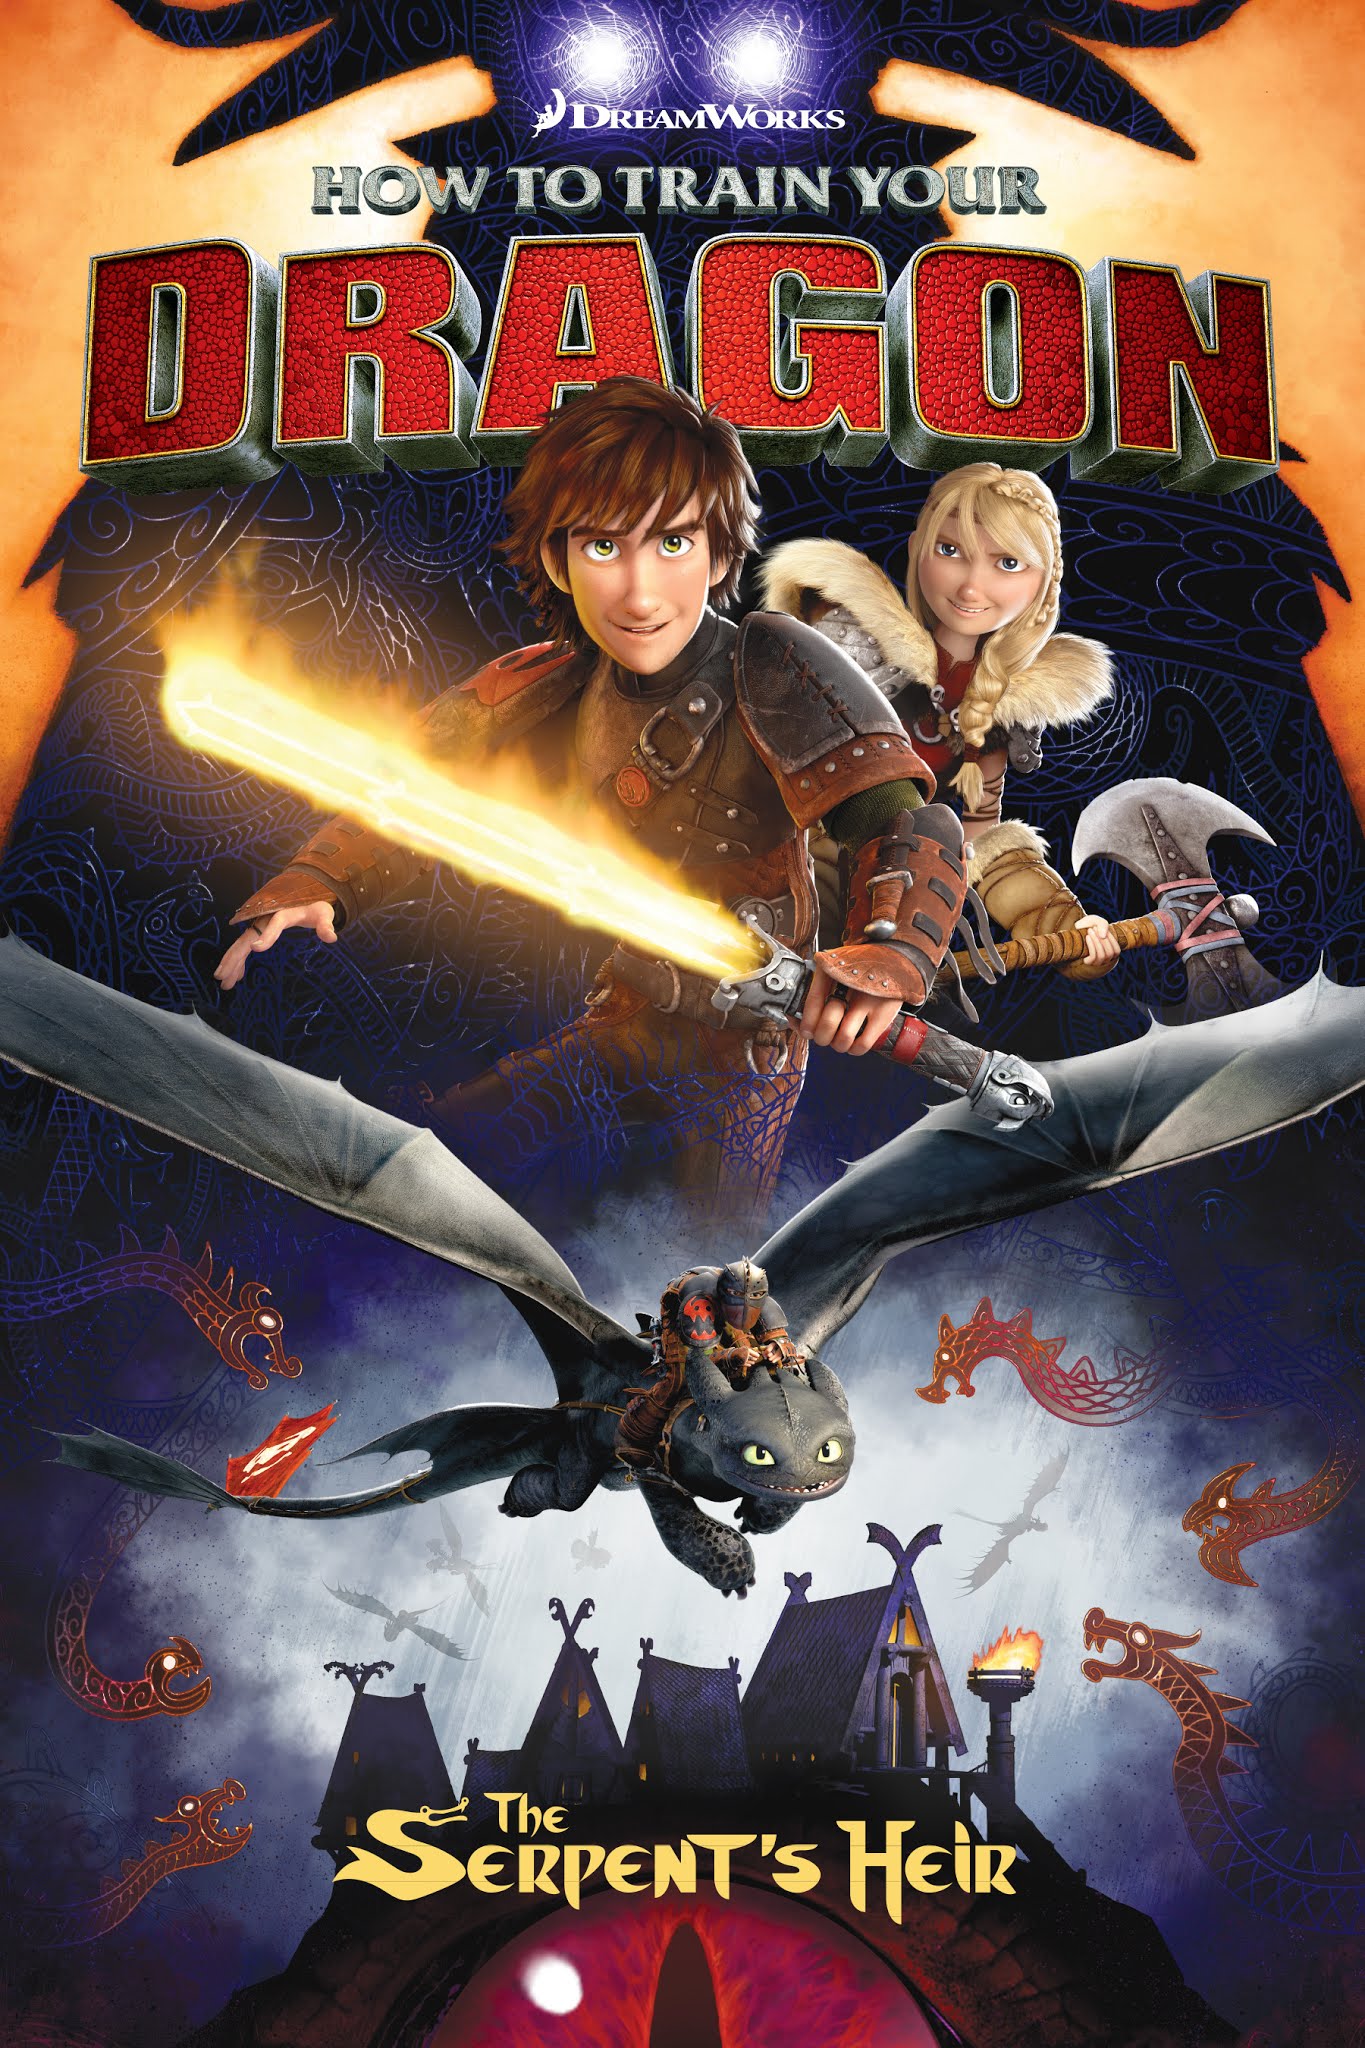 Read online How To Train Your Dragon: The Serpent's Heir comic -  Issue # TPB - 1